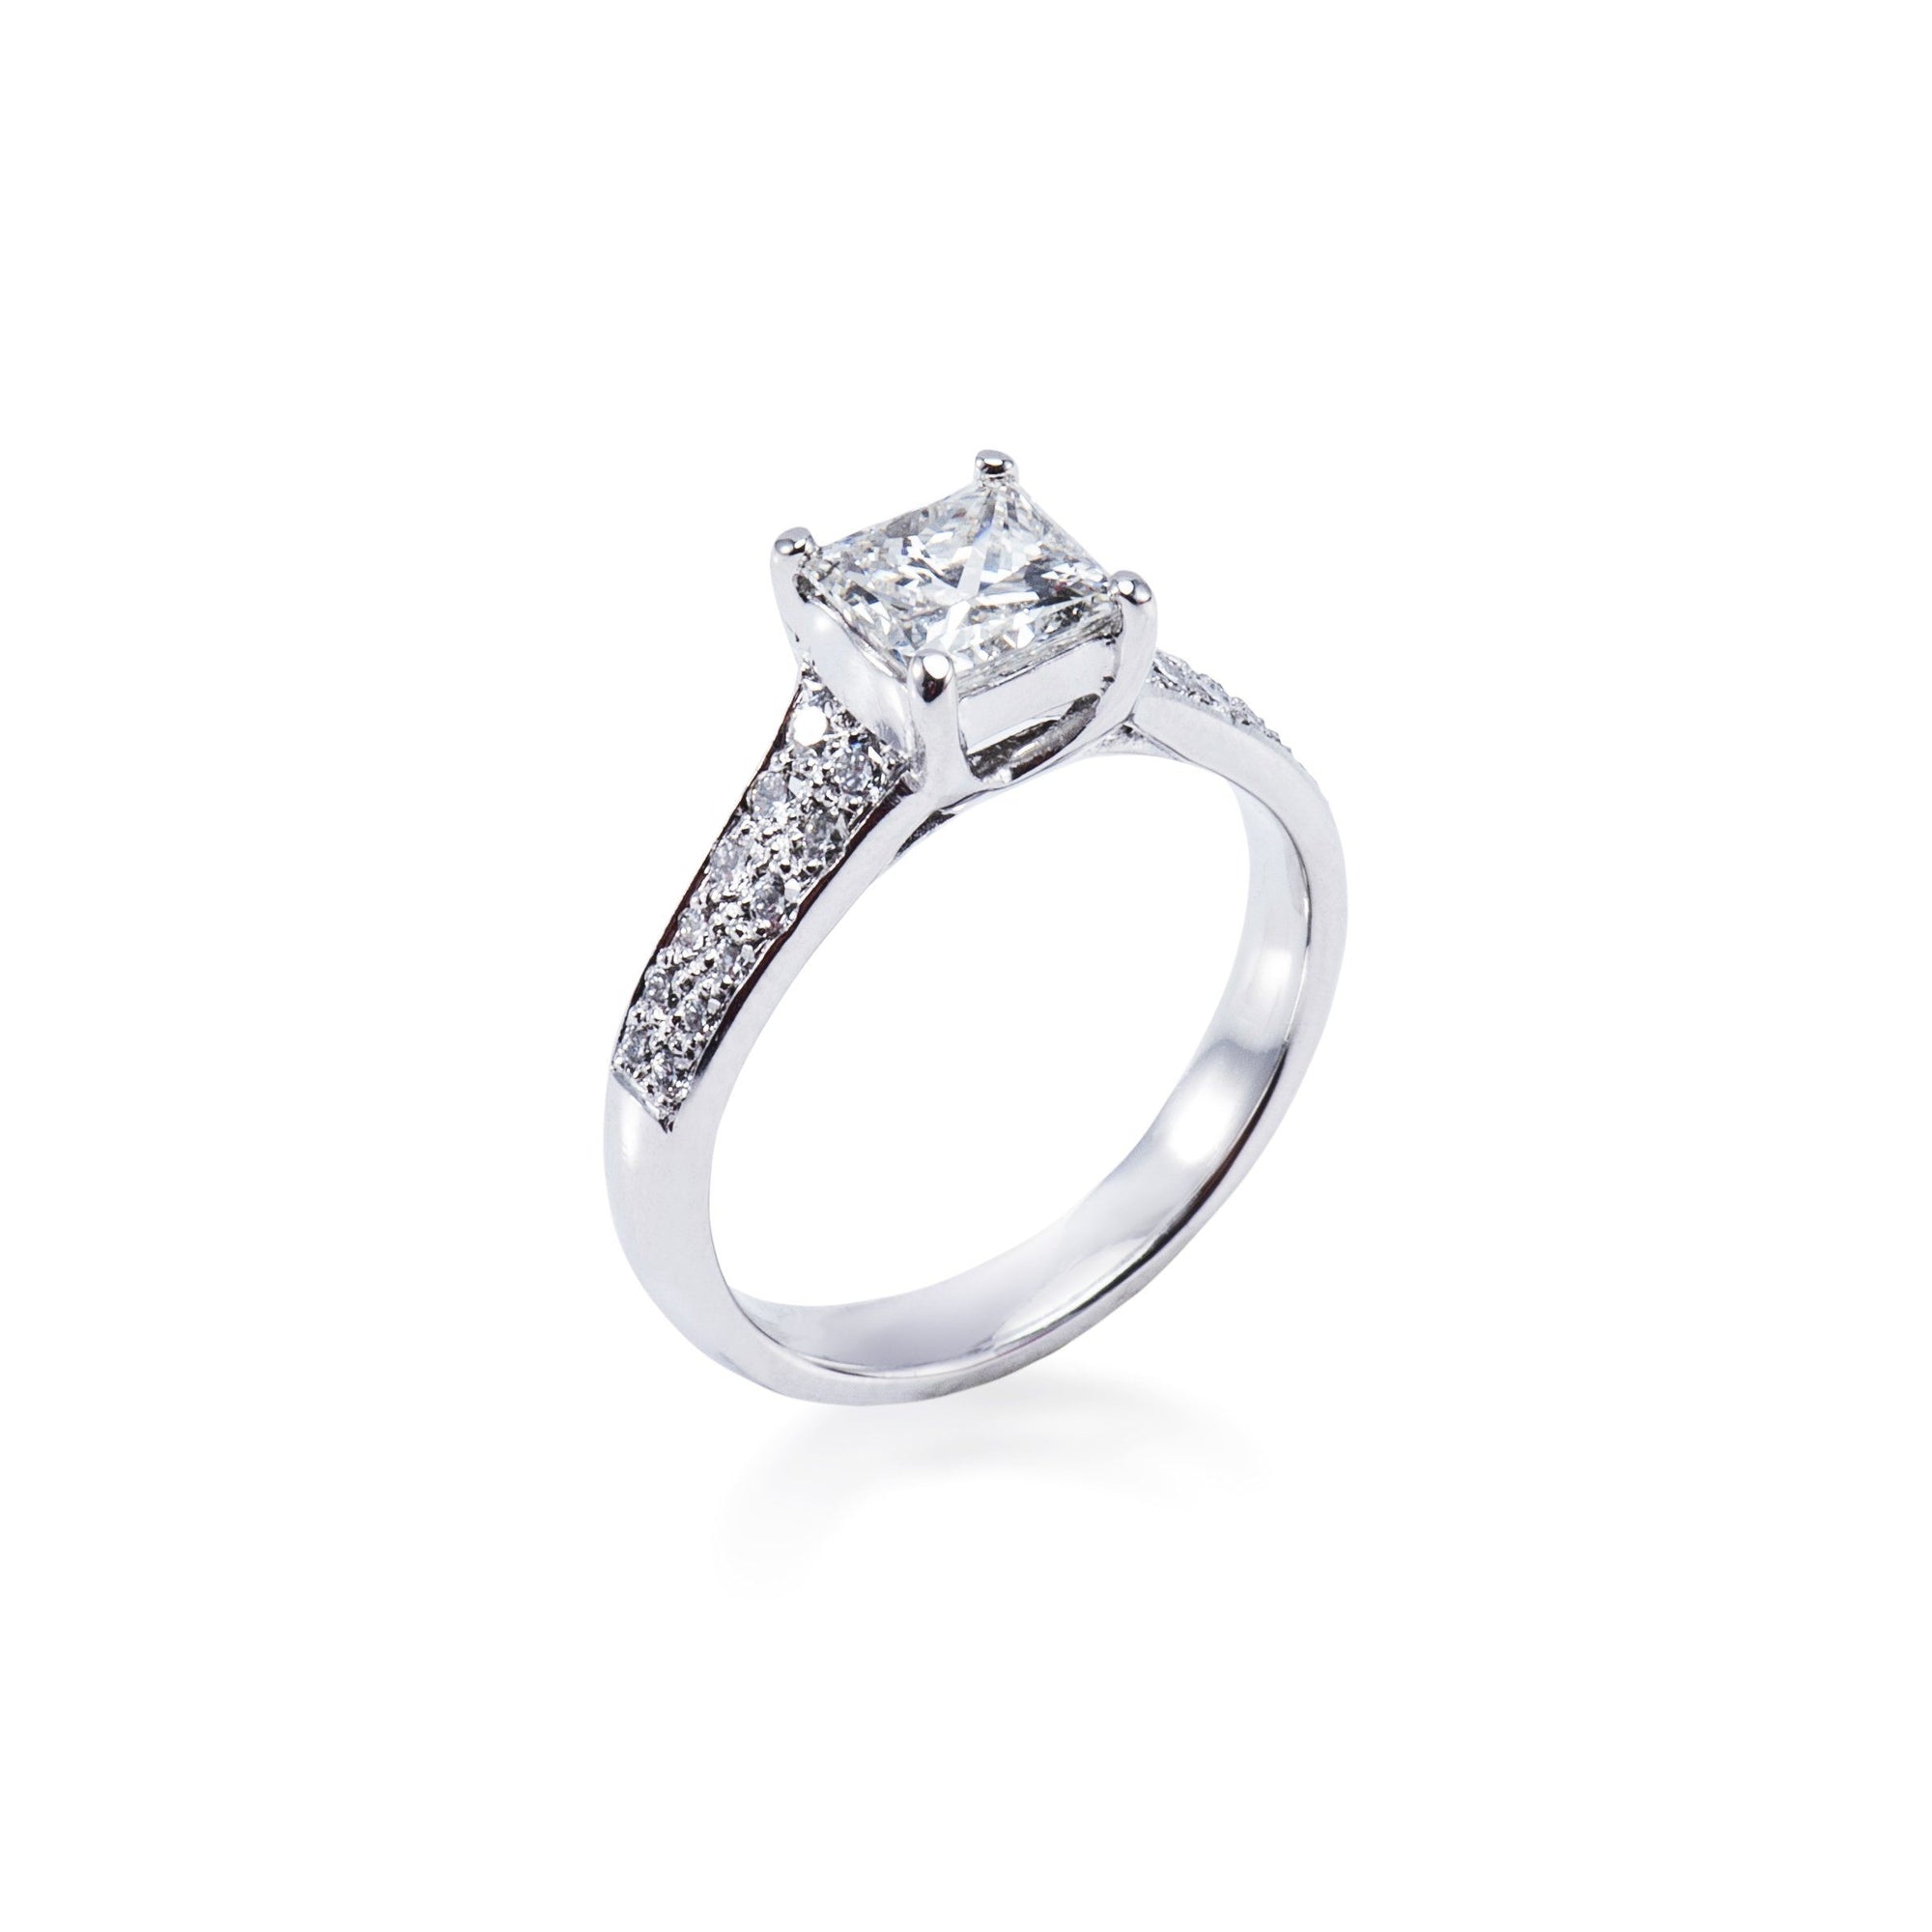 Platinum solitaire princess cut diamond ring with two rows of round brilliant diamonds on the shoulders Aces Jewellers 